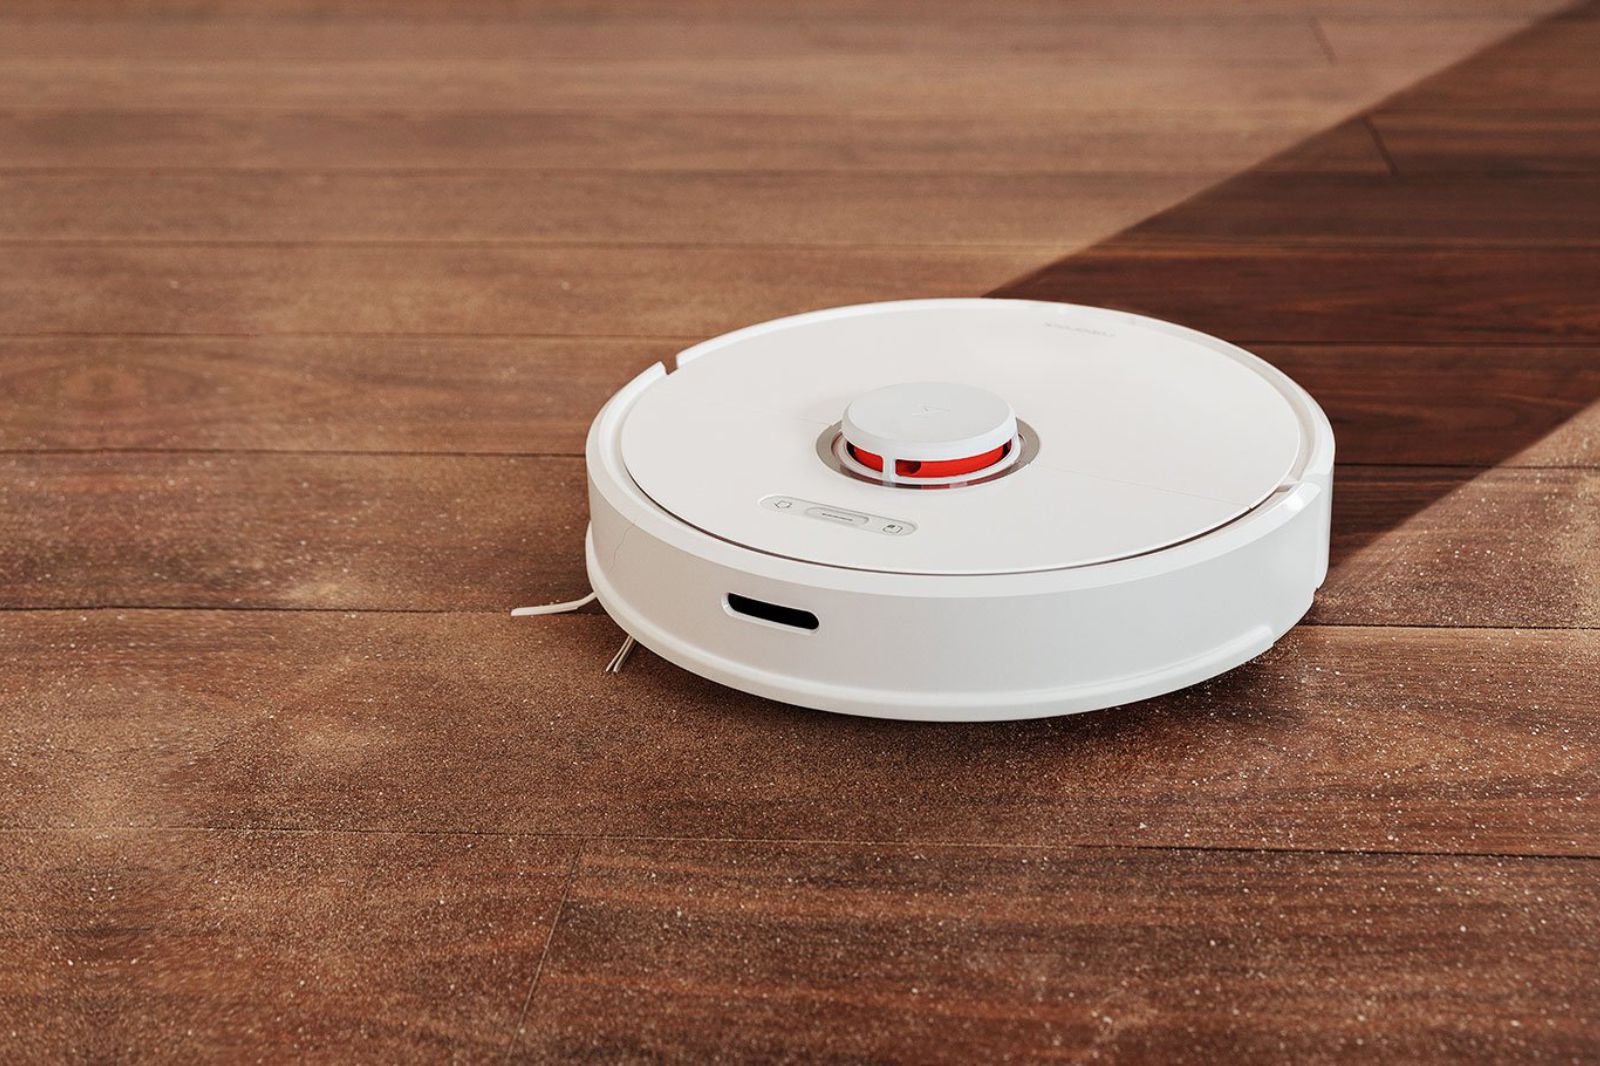 One of our readers spent two months with the Roborock S6 Robot vacuum and this is what she found image 3